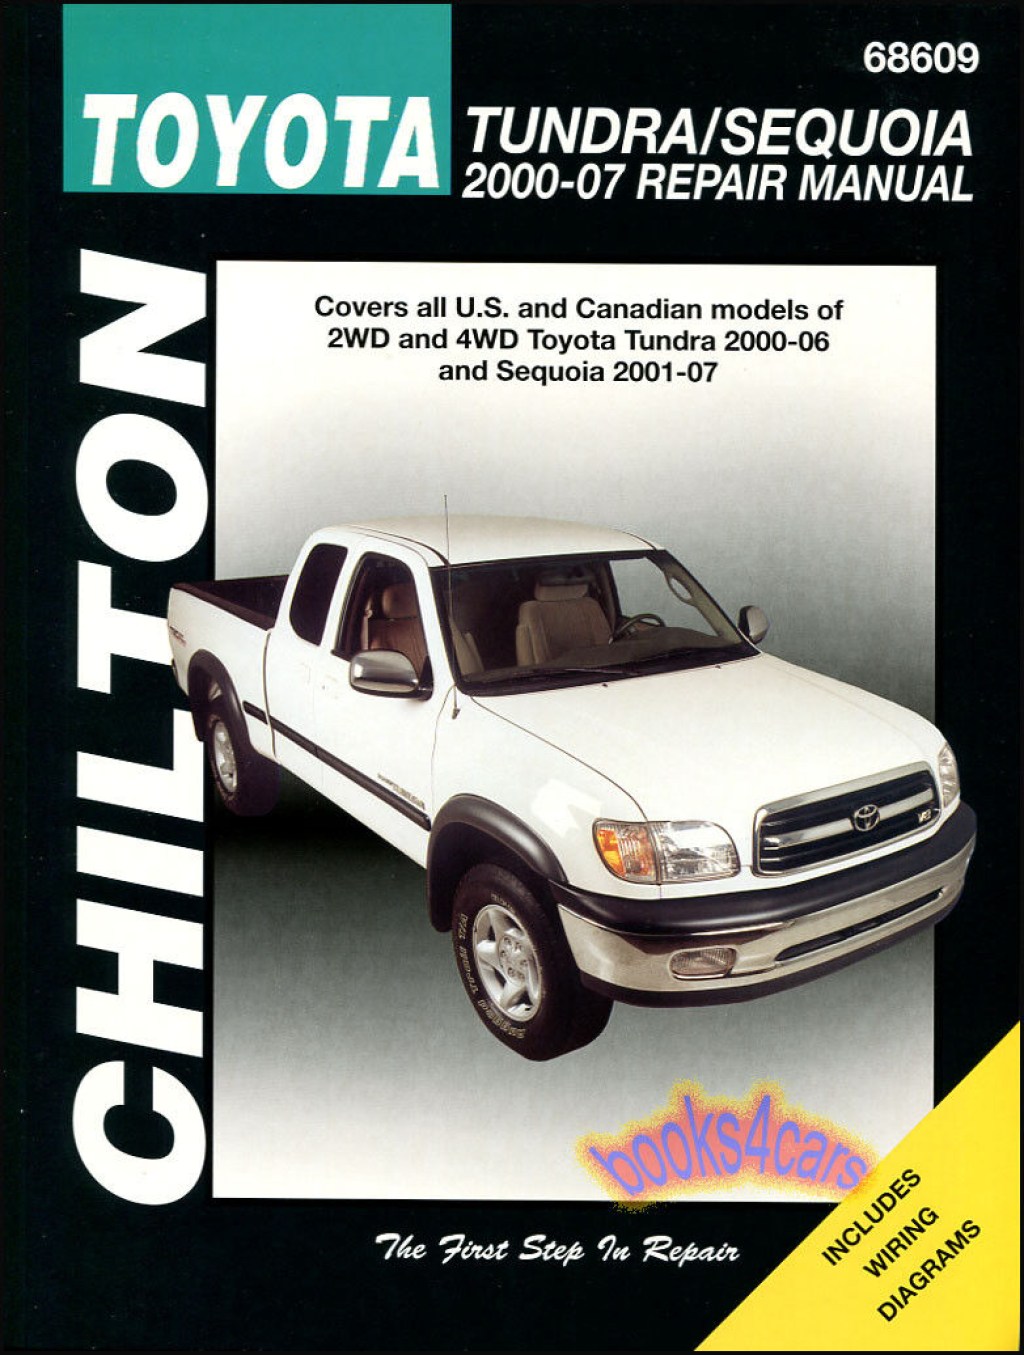 Picture of: Repair Manual-SR Chilton  for sale online  eBay